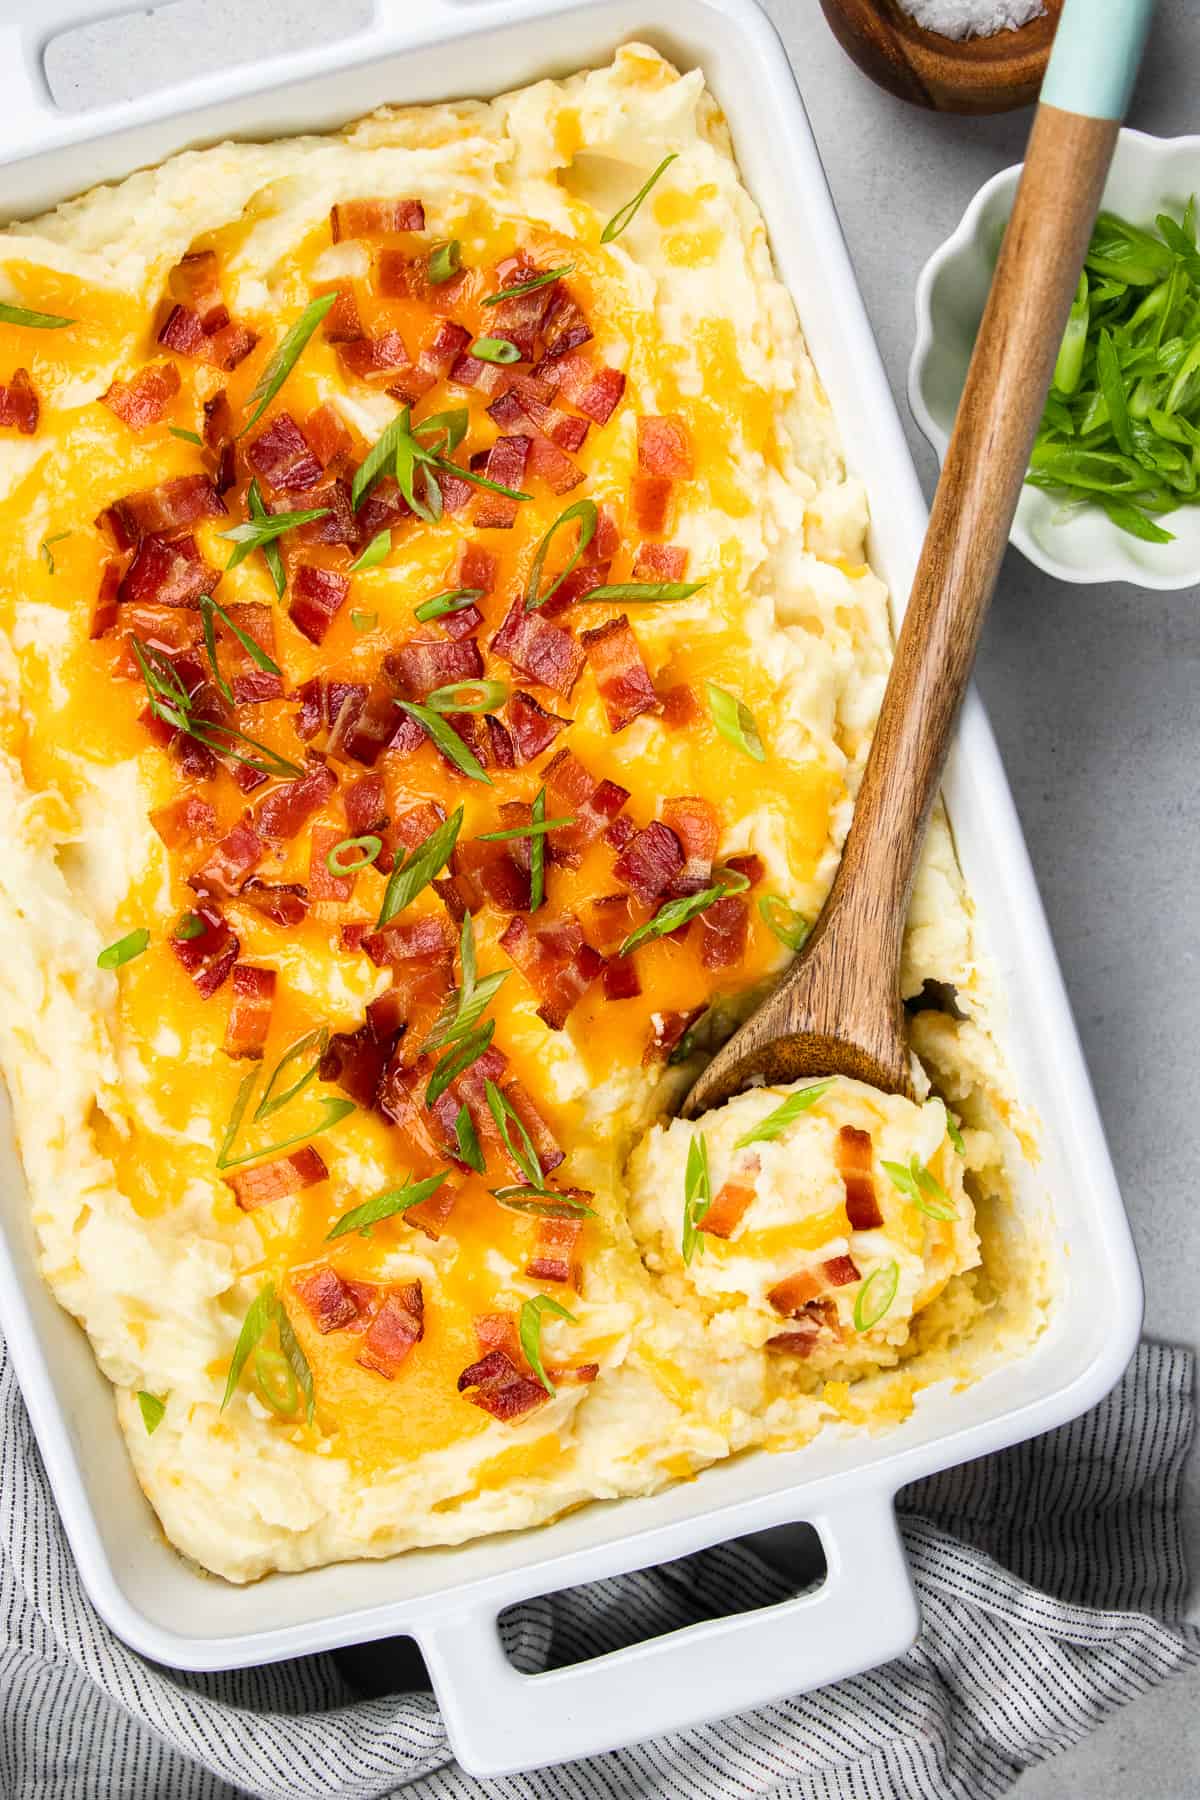 Mashed potatoes topped with cheese and bacon in a white casserole with a wooden spoon.